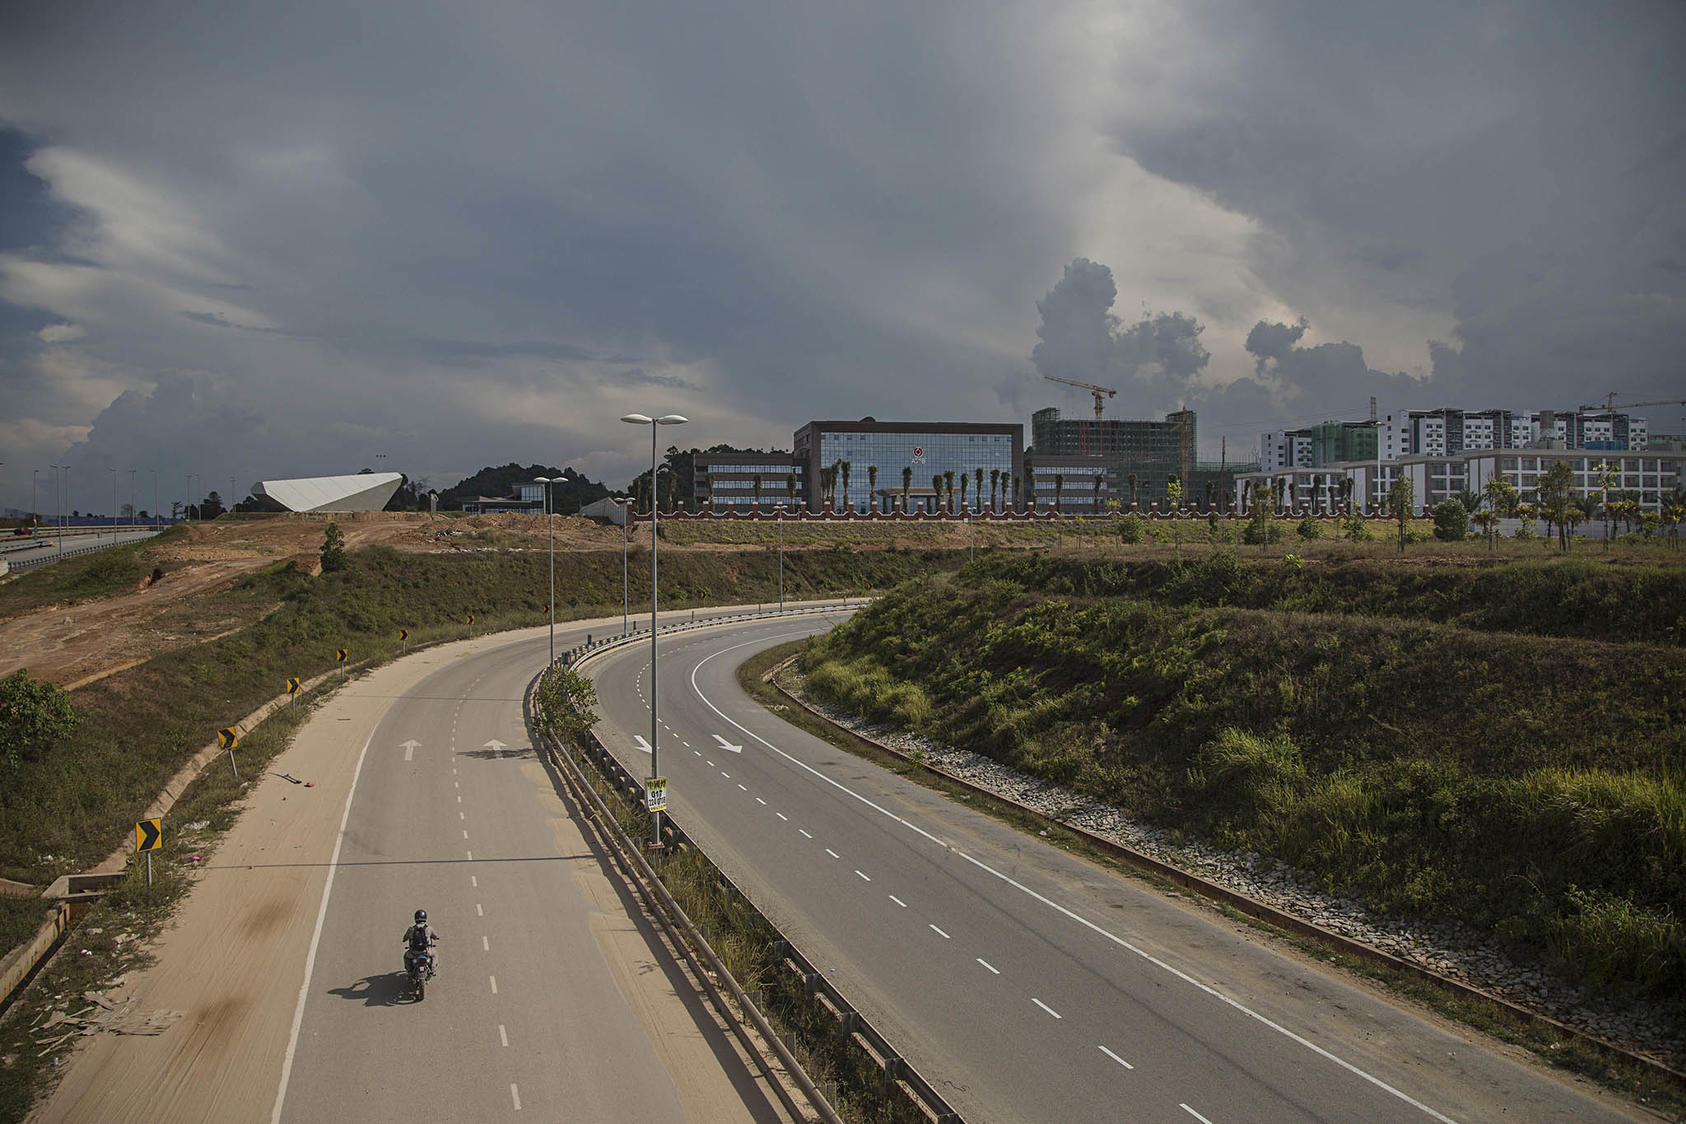 The Malaysia-China Kuantan Industrial Park in Malaysia. Domestic factors and concern over debt led Malaysia to suspend some Belt and Road projects in 2018, but it continues to declare support for Chinese investment. (Lauren DeCicca/The New York Times)